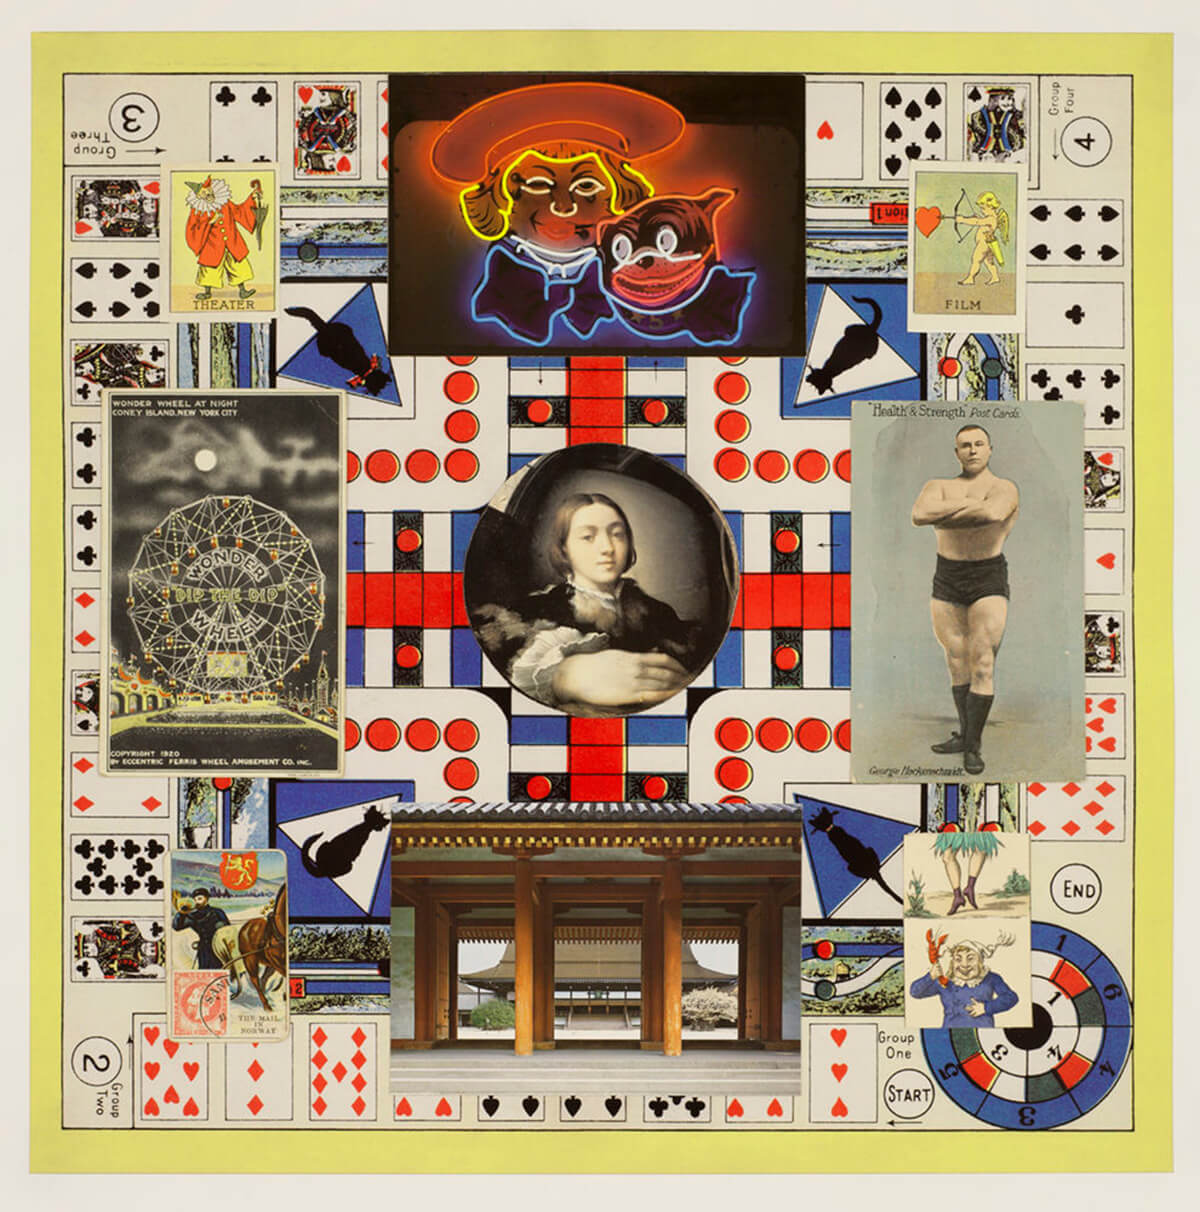 John Ashbery, <em>The Mail in Norway</em>, 2009. Collage and digitized print, 16 1/4 by 16 1/4 inches. Courtesy Tibor de Nagy, New York.